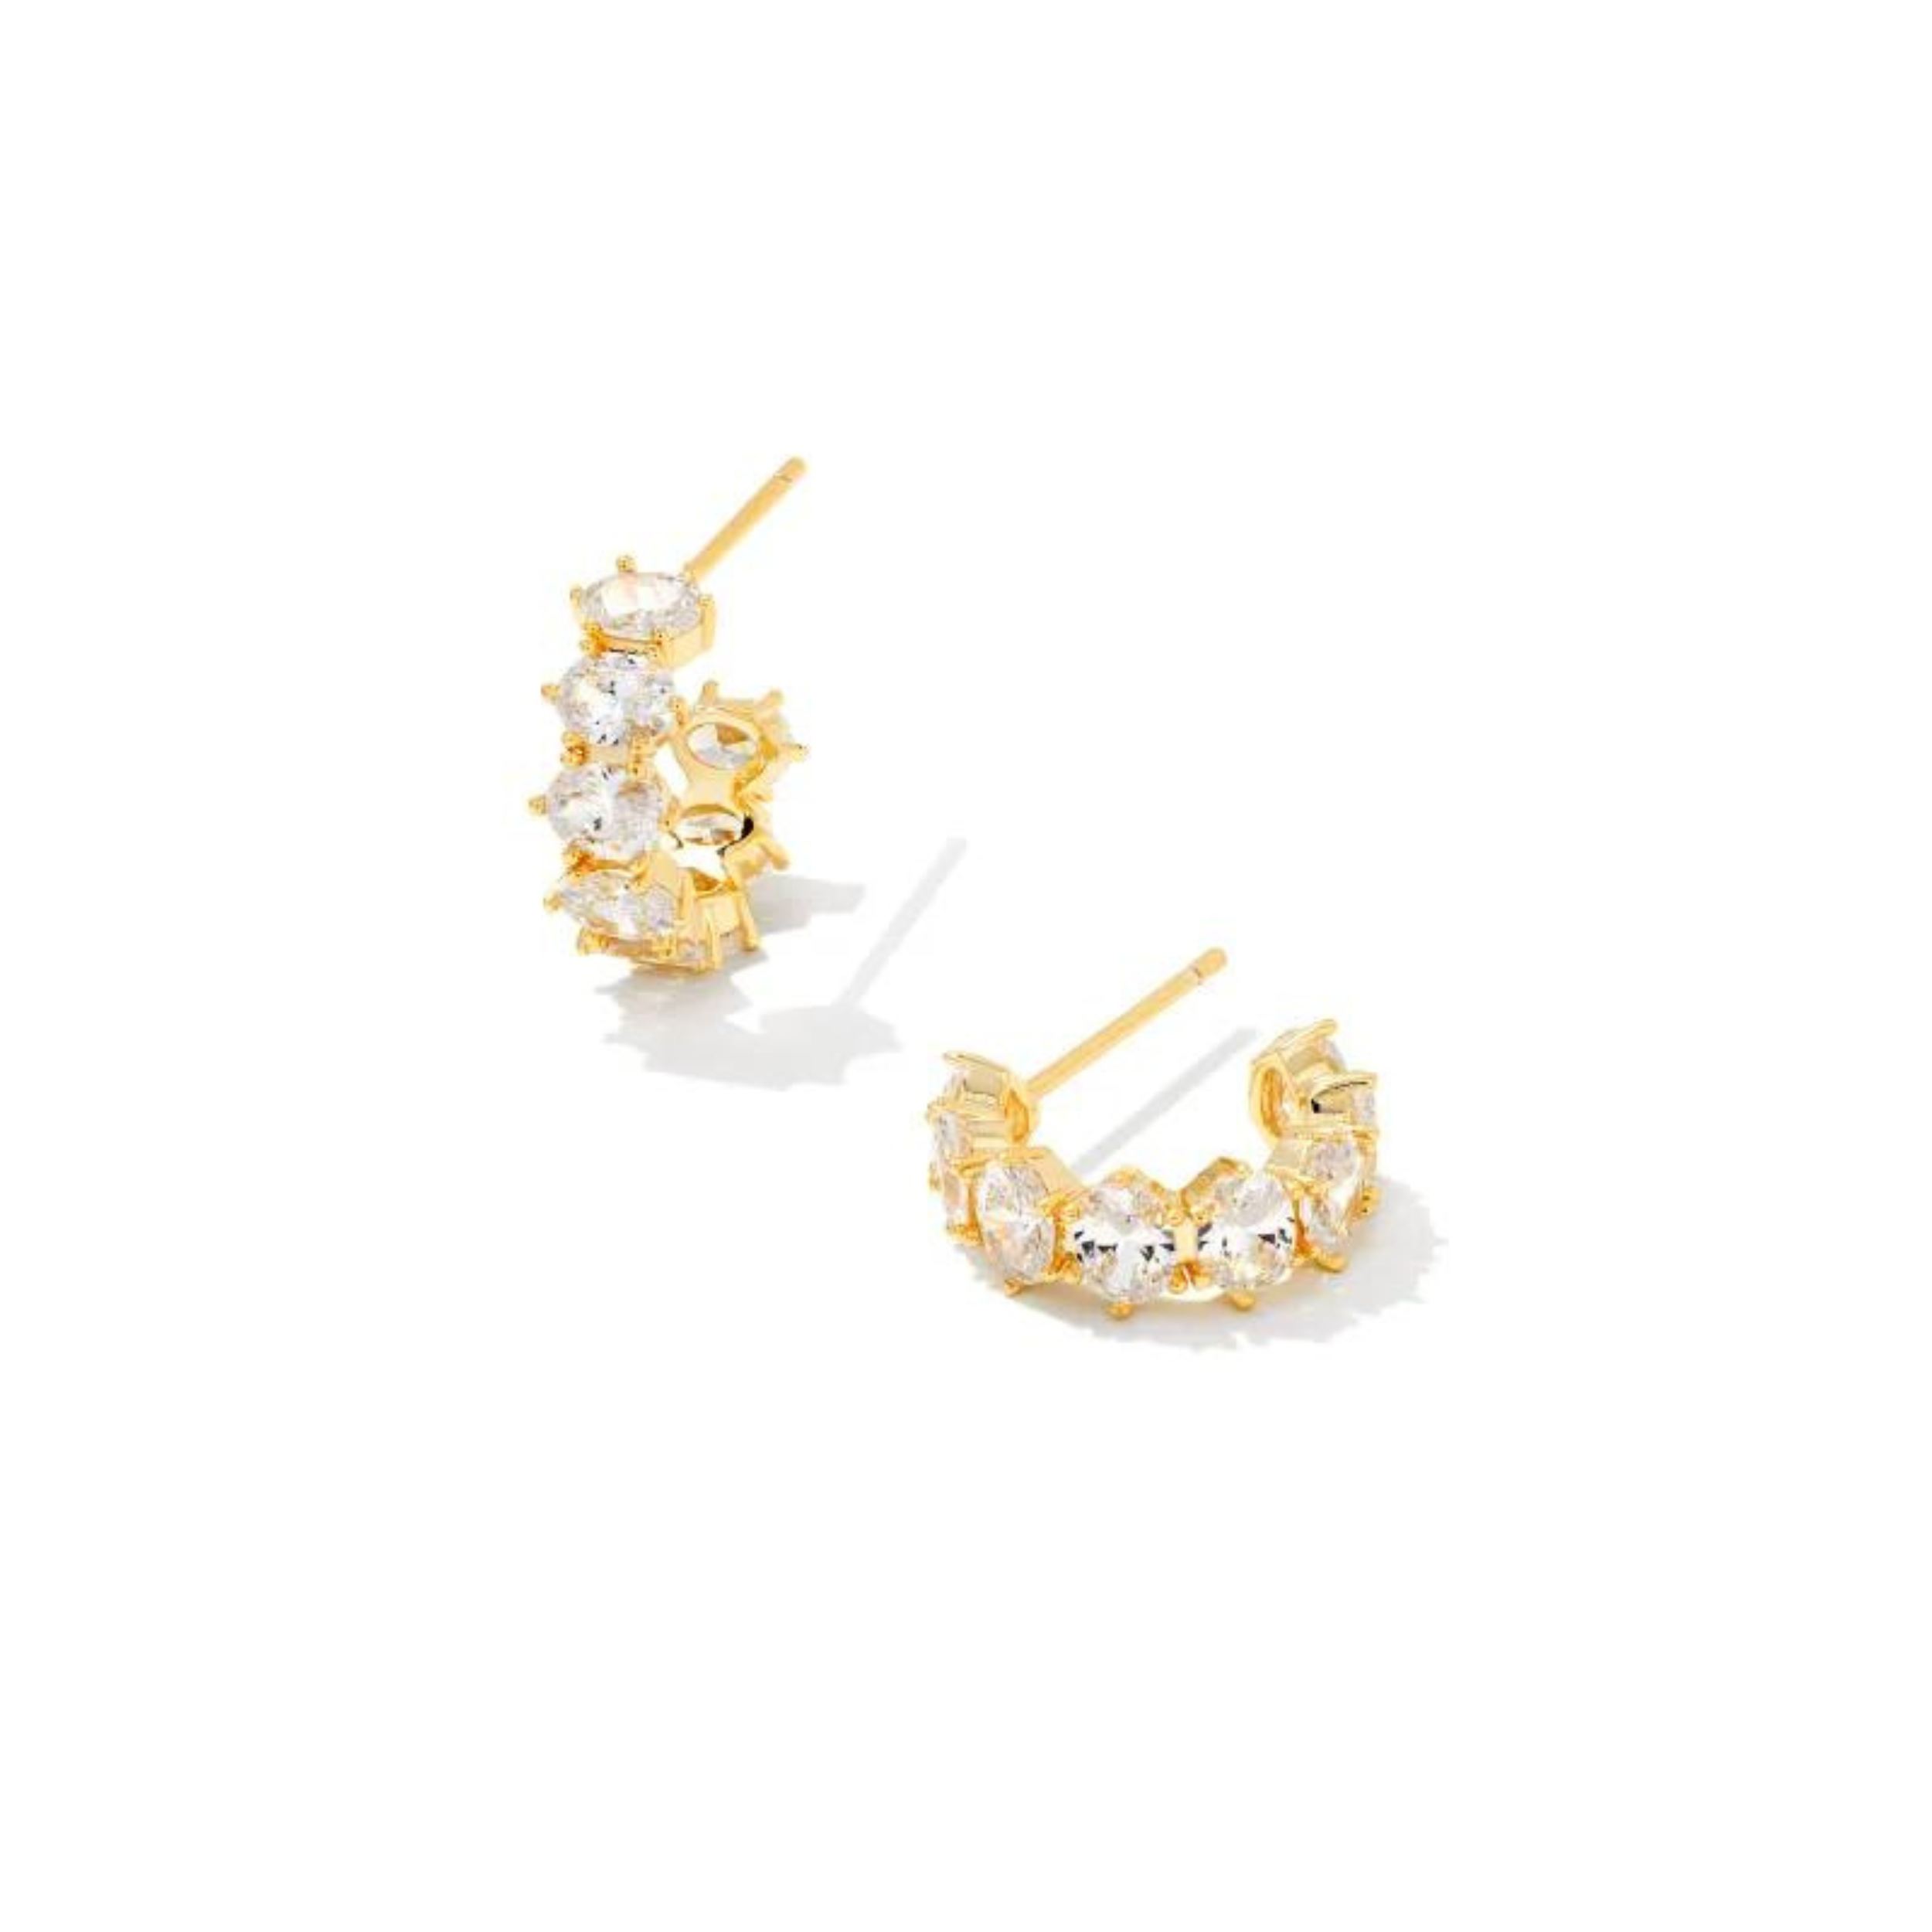 Gold crystal huggie earrings, pictured on a white background.